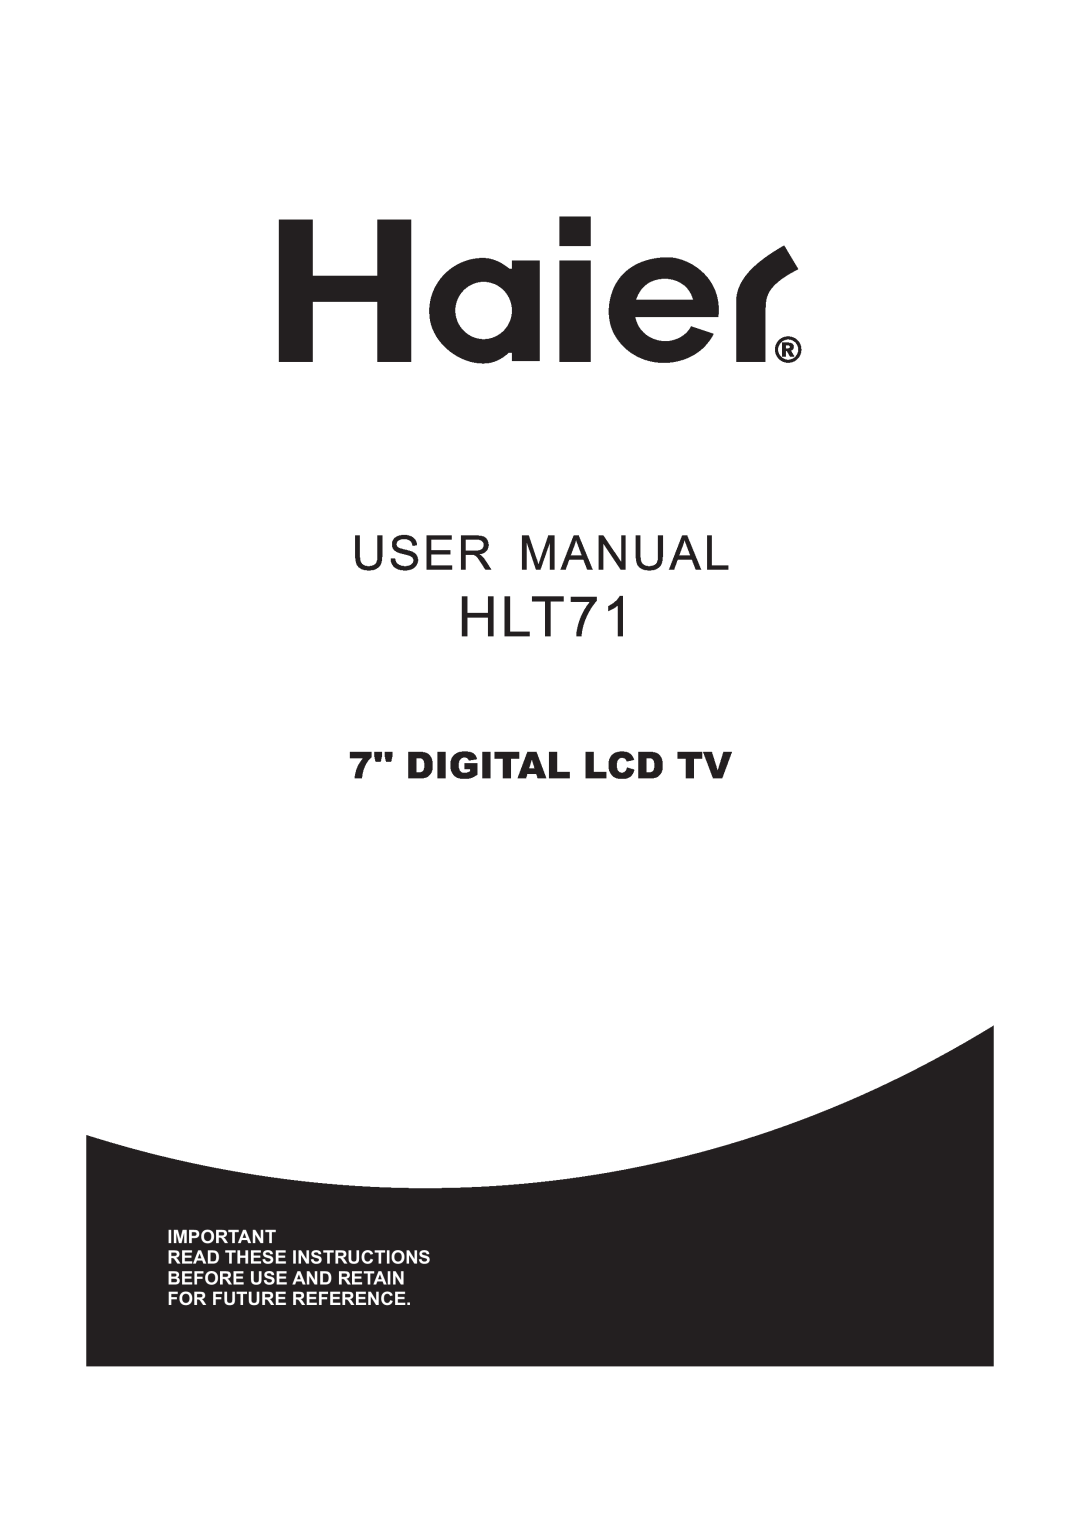 Haier HLT71 user manual User Manual, Digital Lcd Tv, Read These Instructions Before Use And Retain For Future Reference 